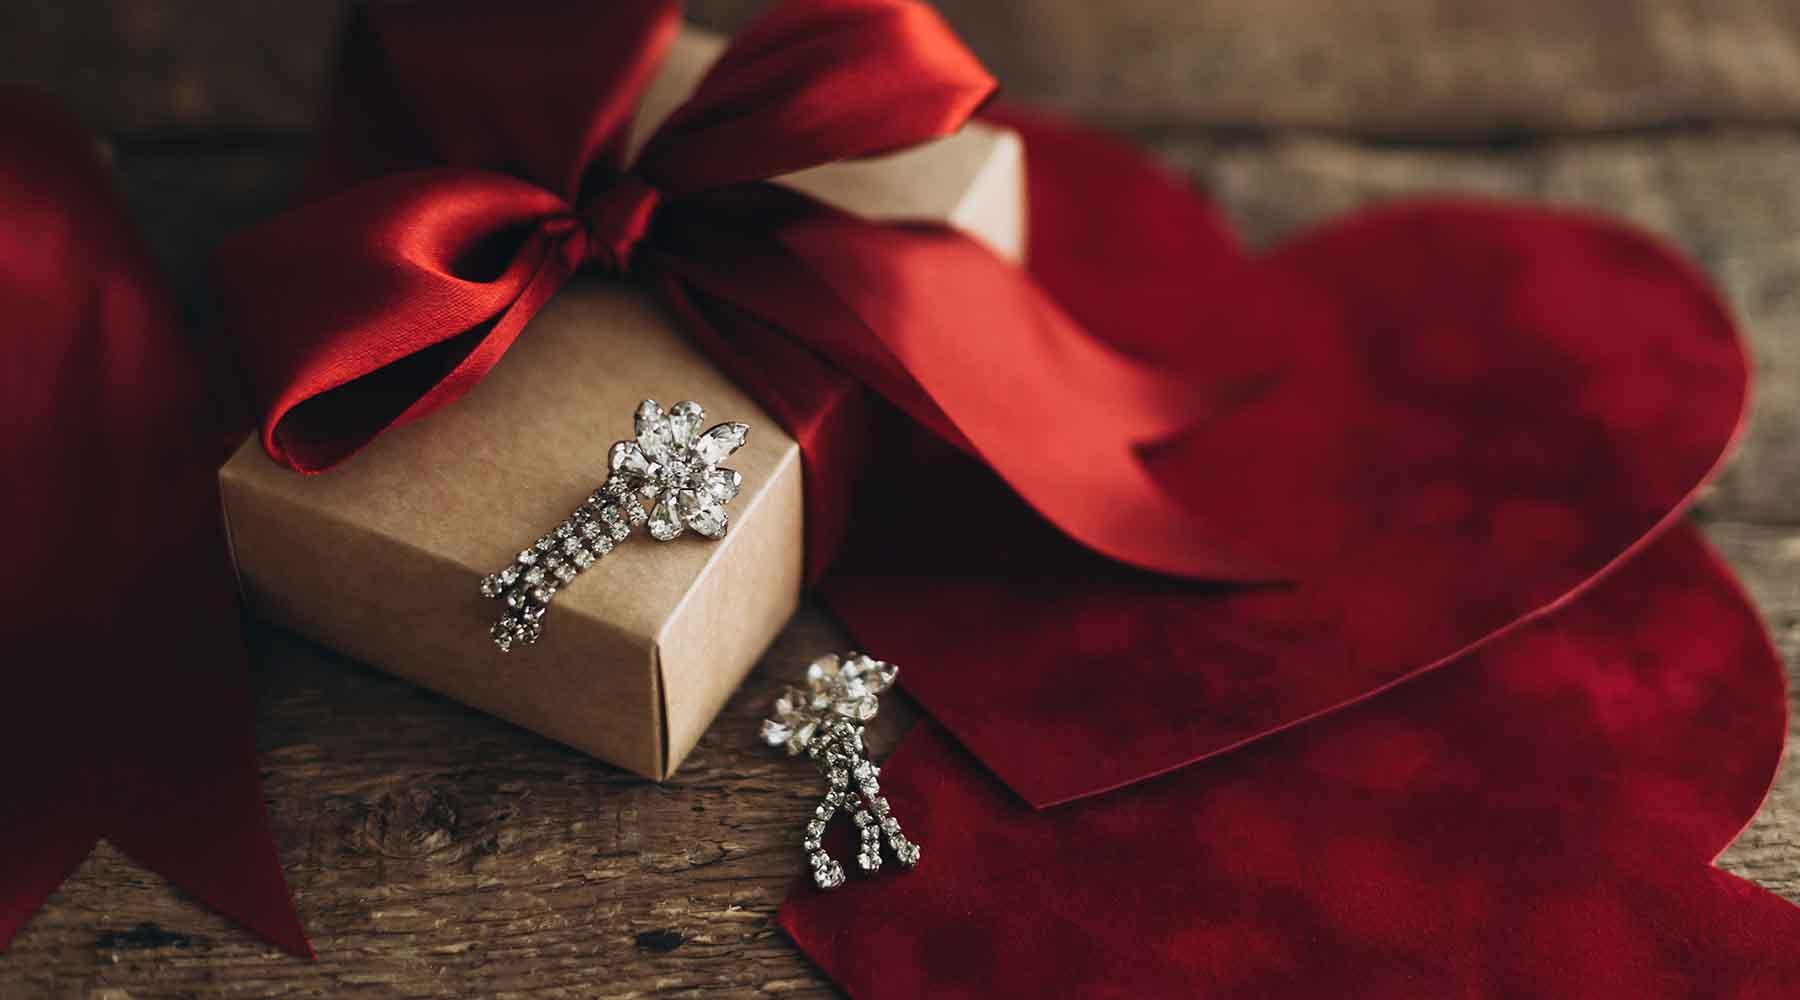 Festive Flair: Holiday-Inspired Christmas Jewelry Gift Ideas